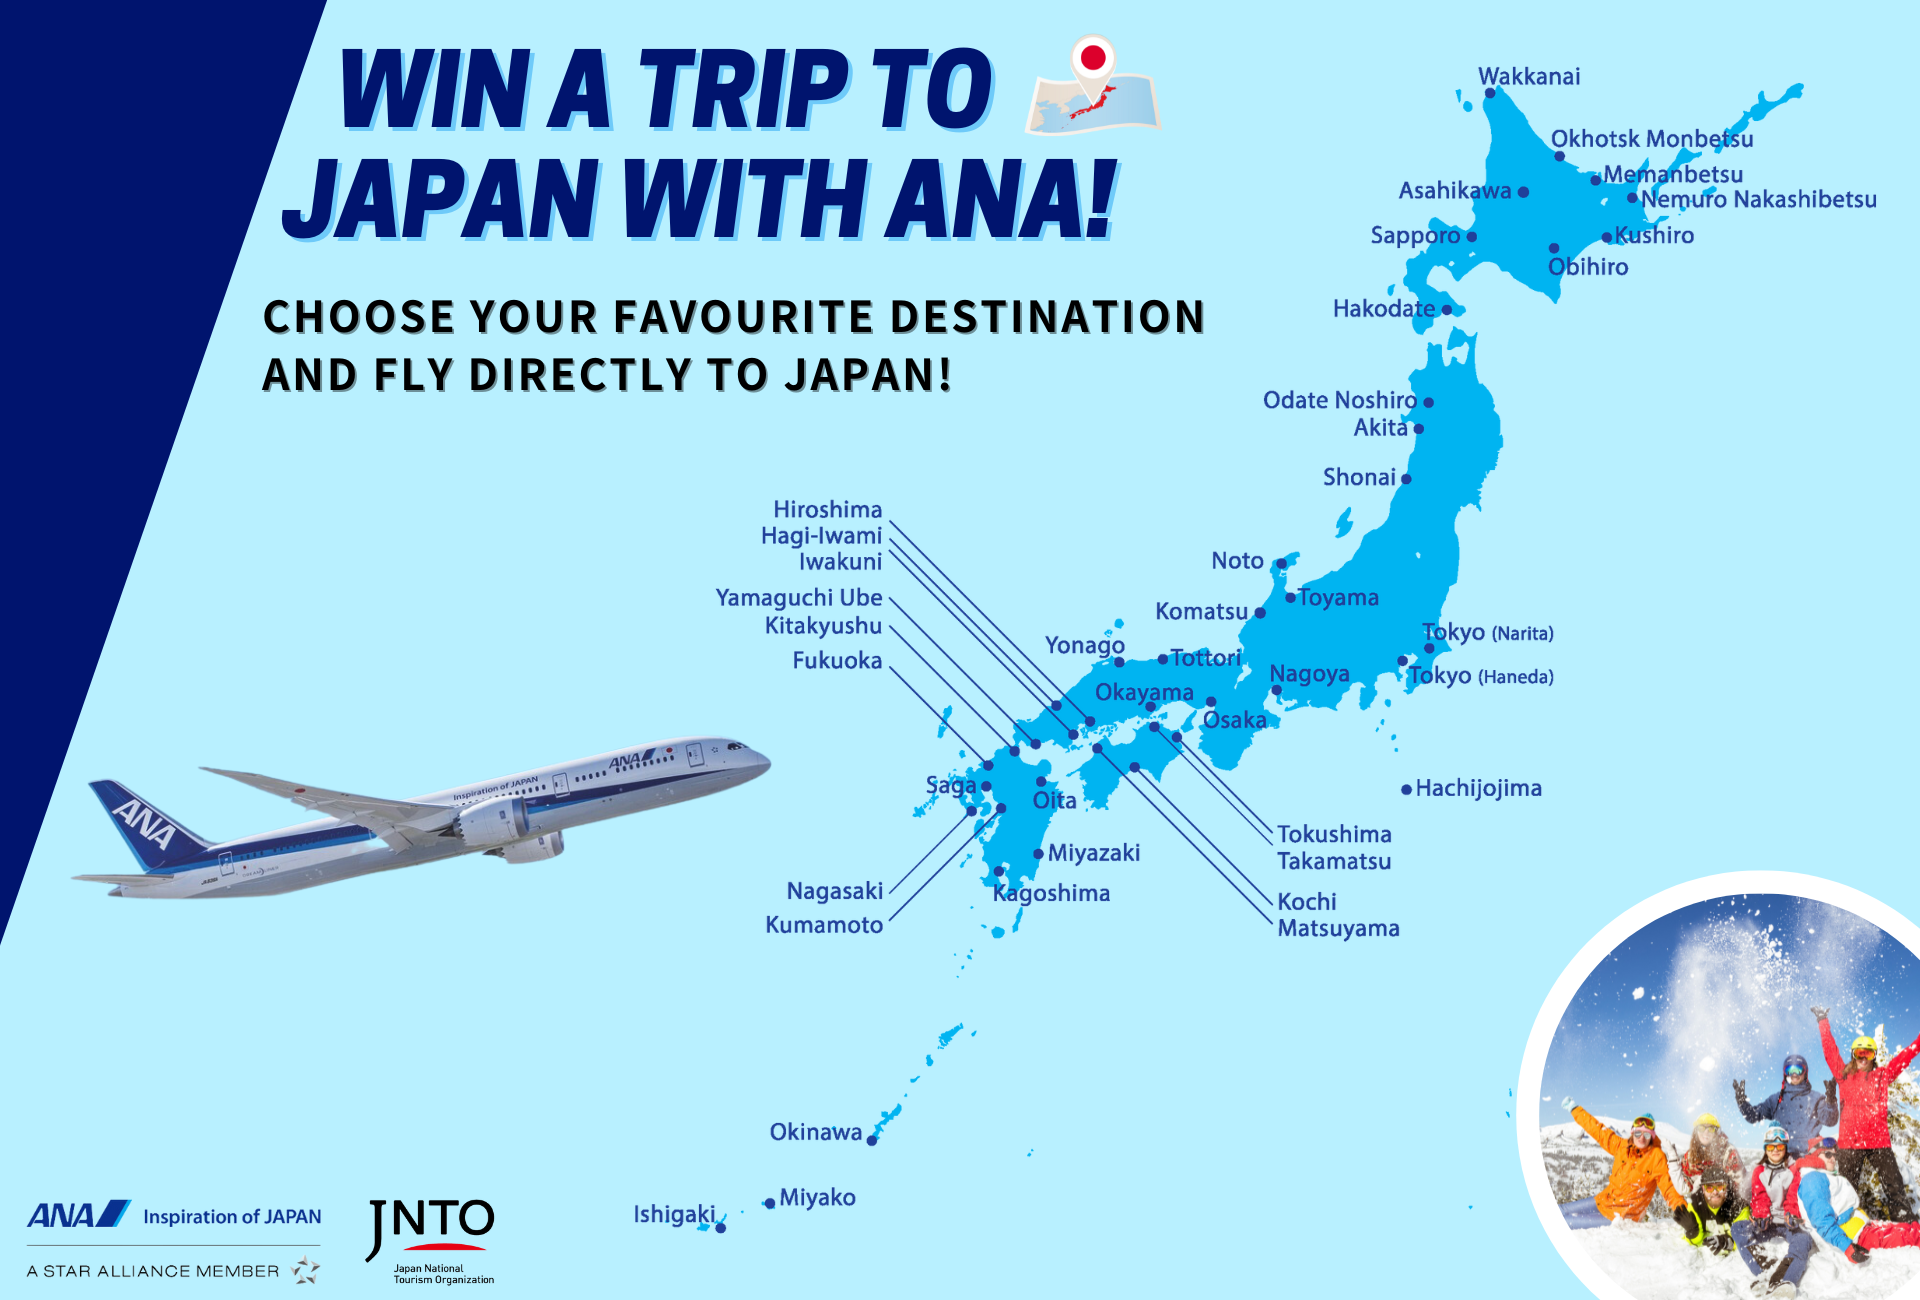 ANA JNTO Win Three Pair of Tickets to Japan WHICH CITY WOULD YOU CHOOSE TO FLY?